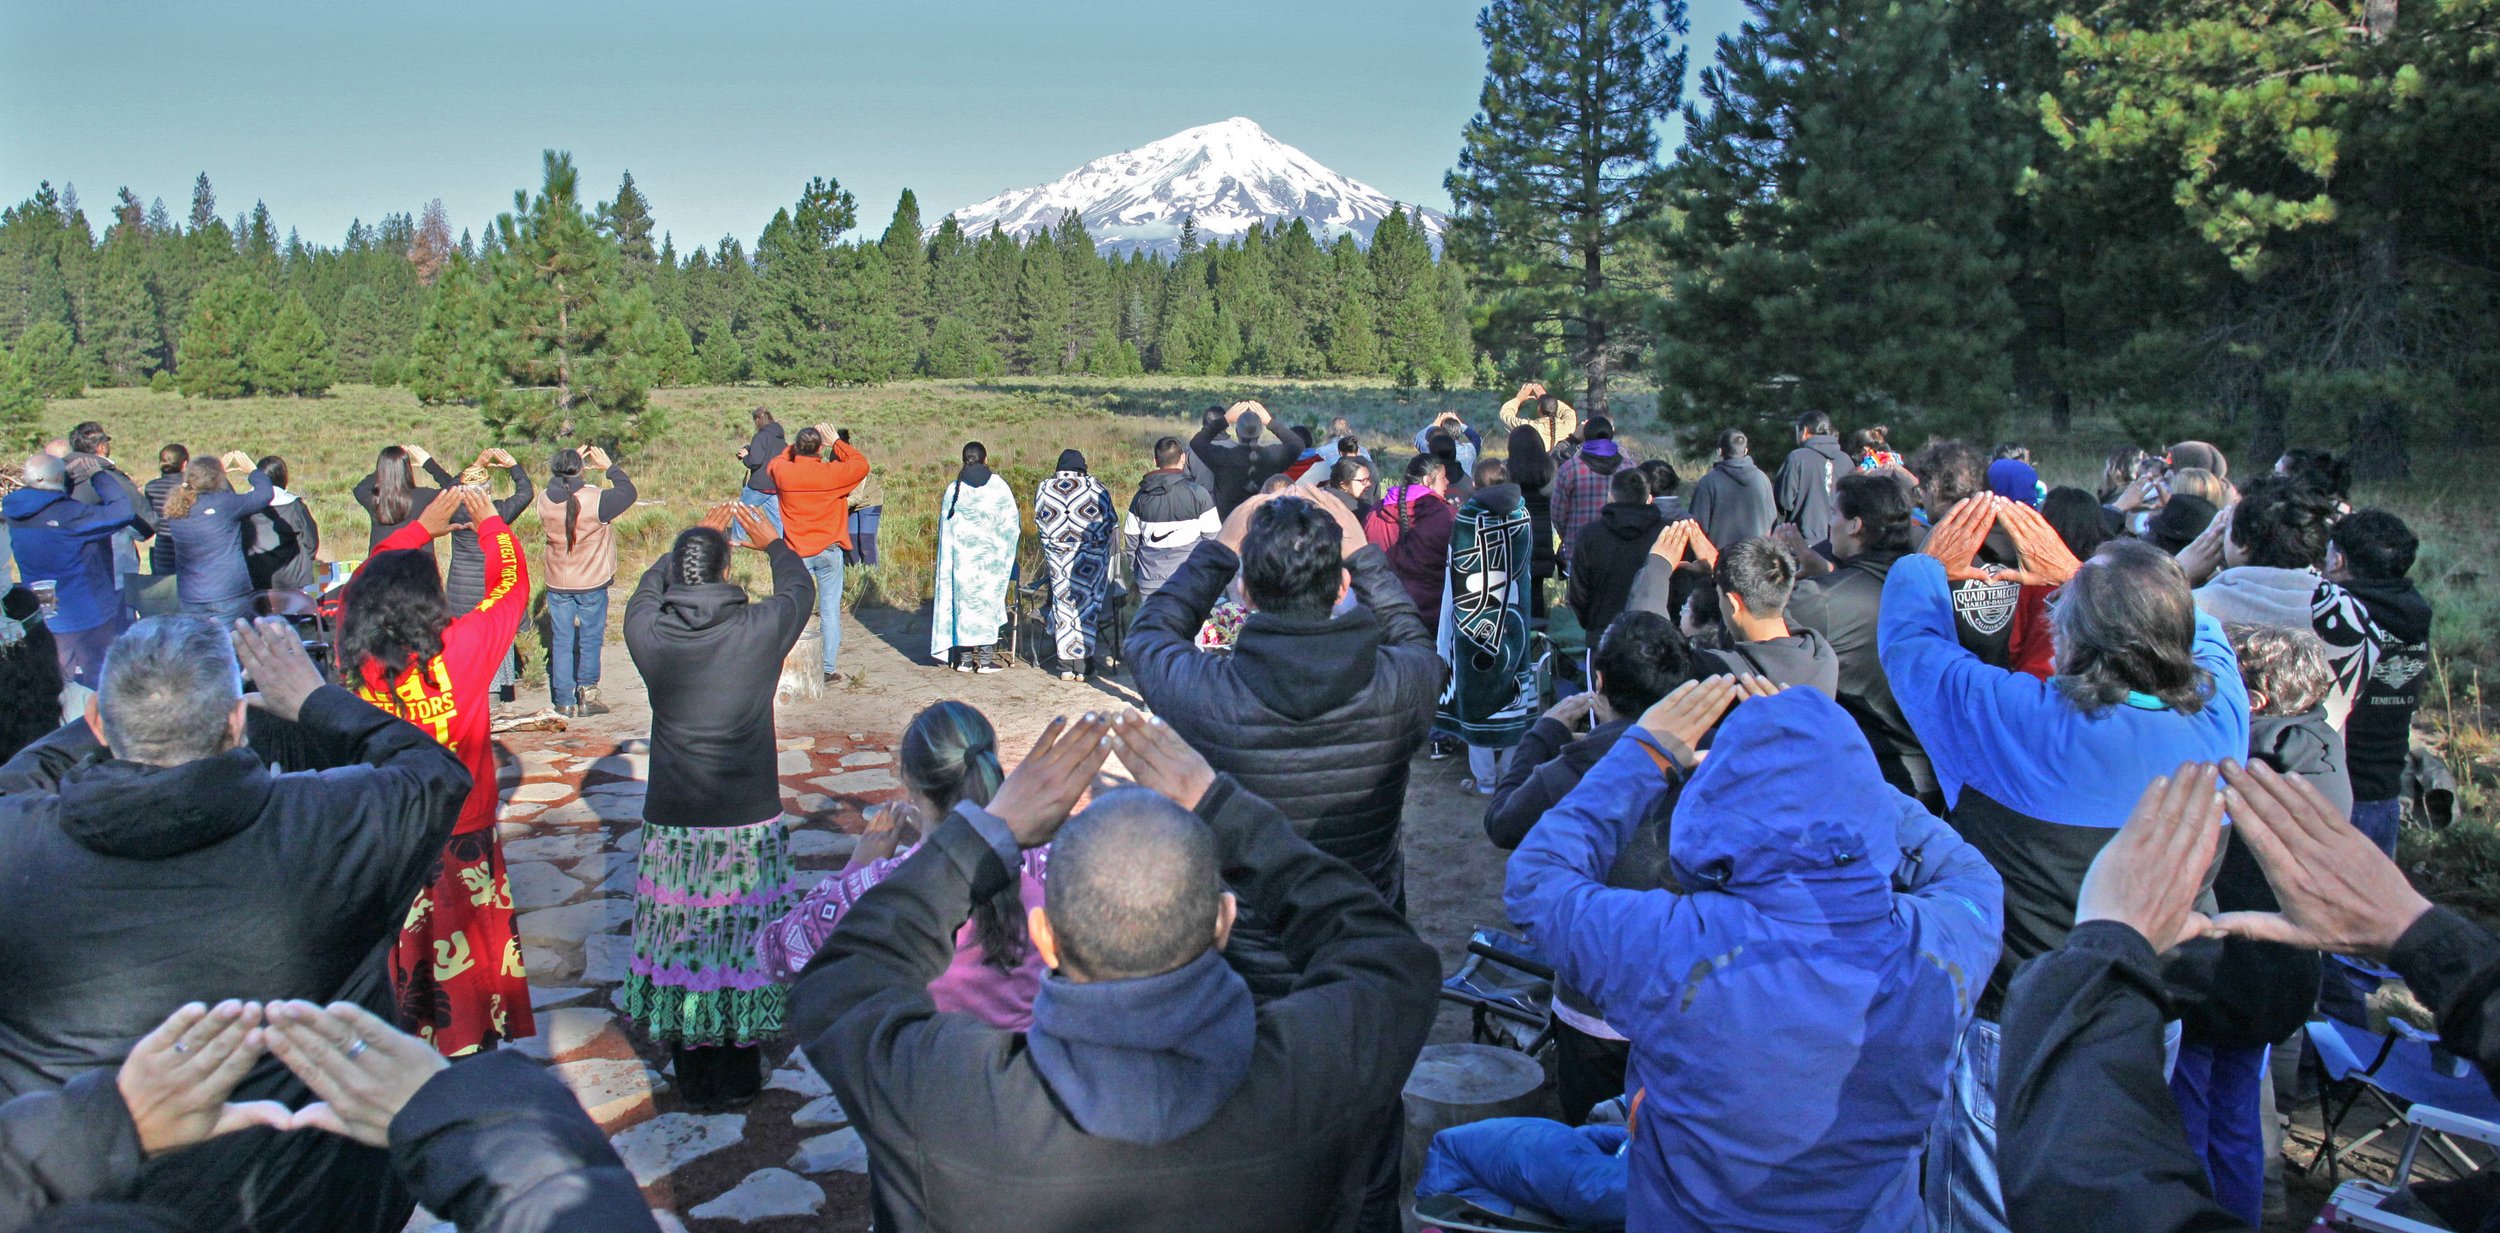  McCloud, CA — The Winnemem Wintu and friends gather for a sunrise ceremony near the base of Mt. Shasta. That morning, they saw an image of a bear with salmon on the mountain’s slopes. August 11, 2019. Tom Levy/The Spiritual Edge 